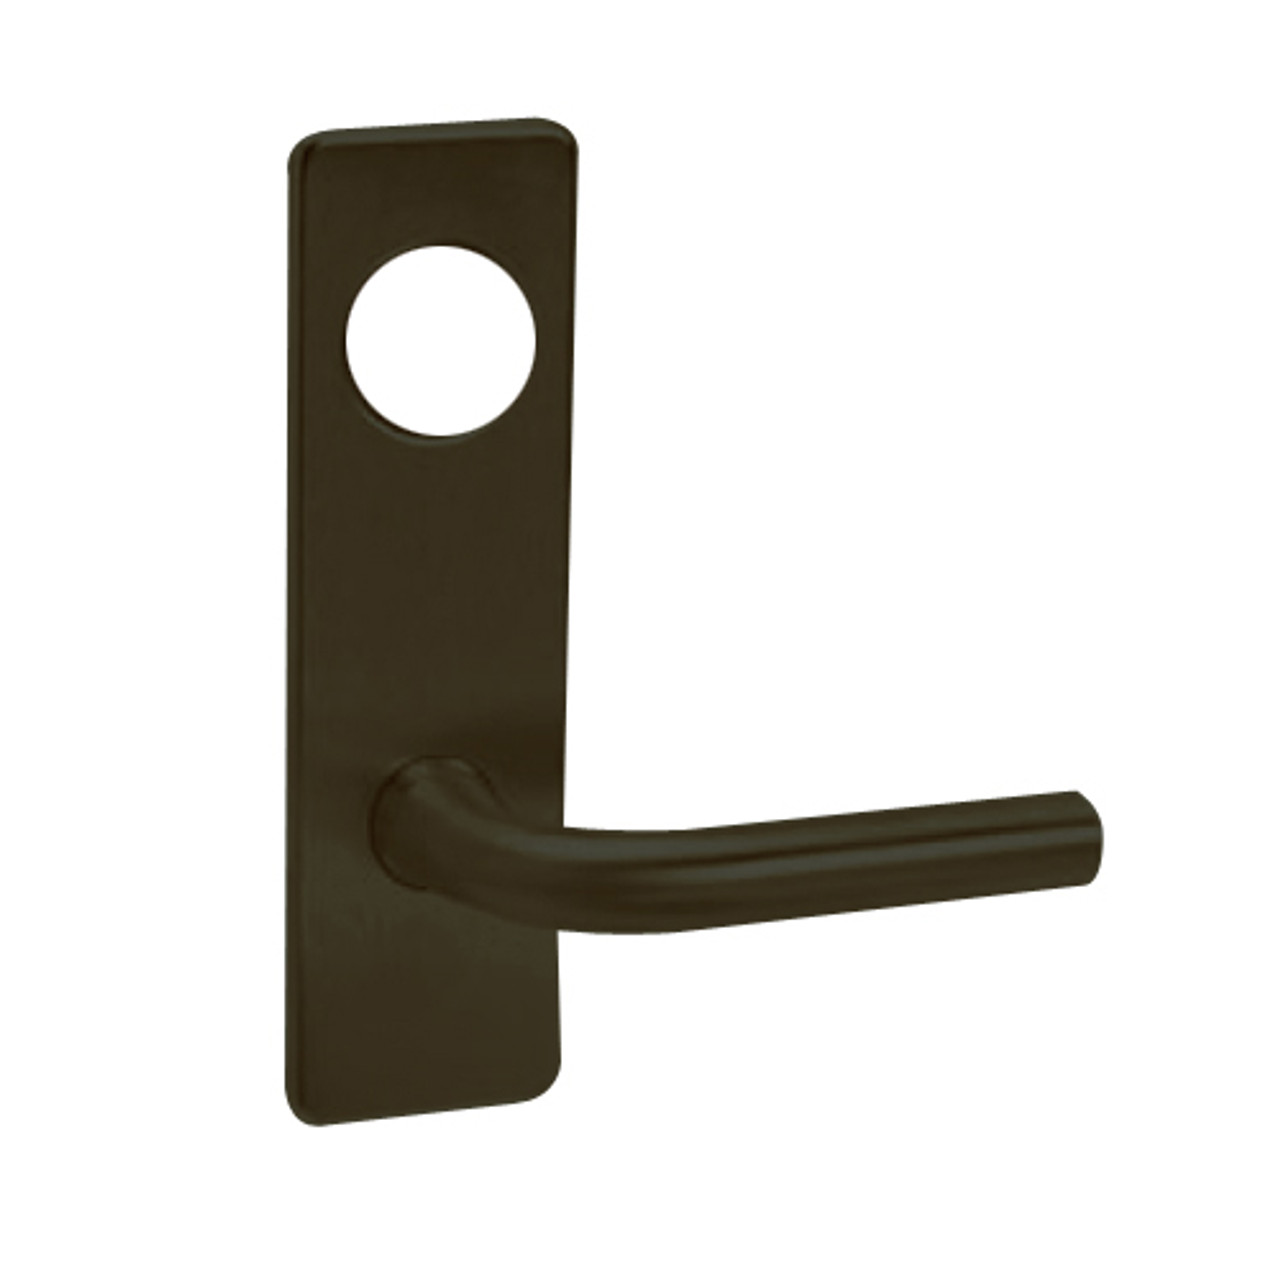 ML2056-RSM-613-CL7 Corbin Russwin ML2000 Series IC 7-Pin Less Core Mortise Classroom Locksets with Regis Lever in Oil Rubbed Bronze